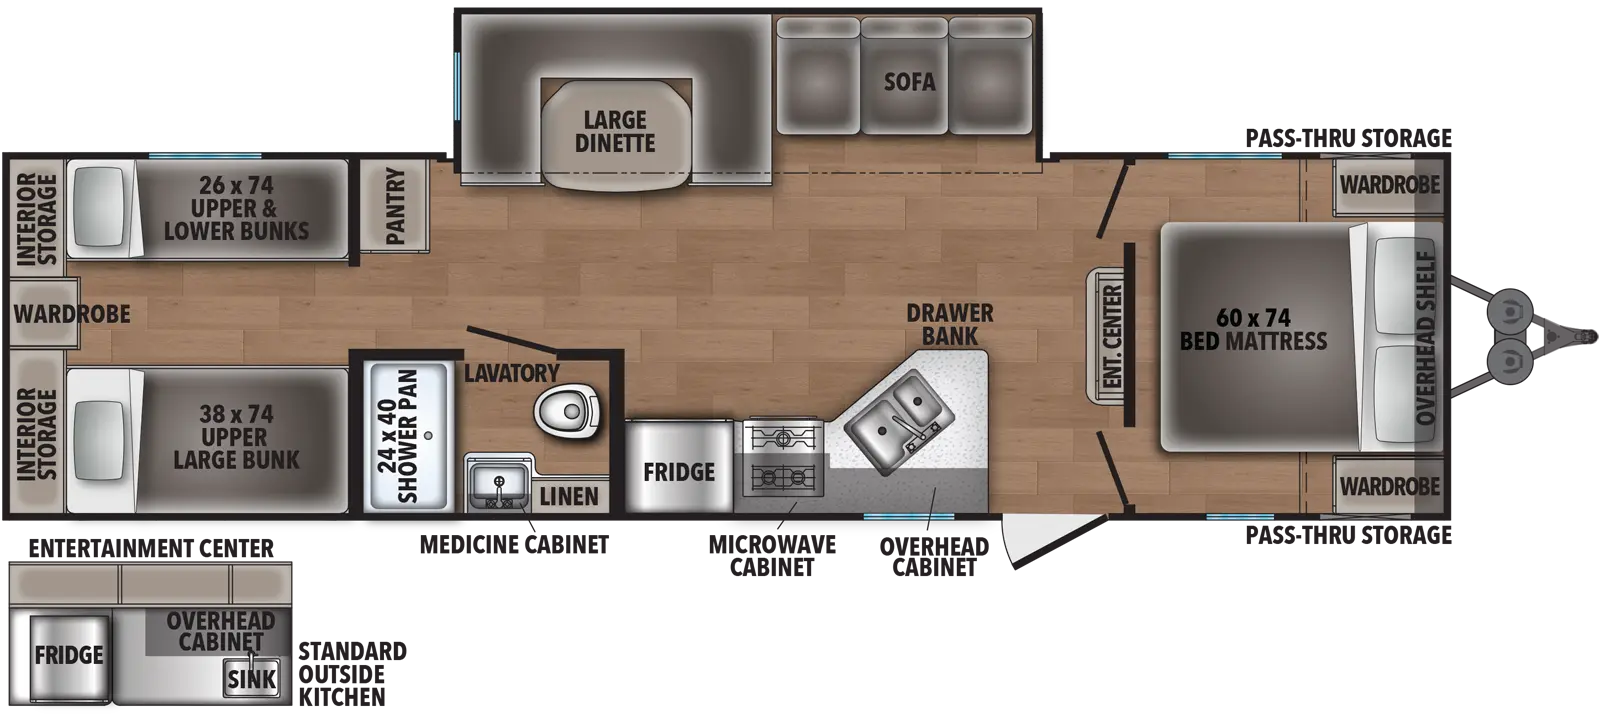 The 31OK has one slide out on the off-door side and one entry door on the door side. Interior layout from front to back: front bedroom with side-facing  queen bed; kitchen, living, dining area with off-door side slide out containing sofa and large dinette; entertainment center; kitchen with double basin sink, overhead cabinet, cook top stove, microwave cabinet, and refrigerator; bathroom; and rear bedroom with two sets of bunks, and bunk storage.